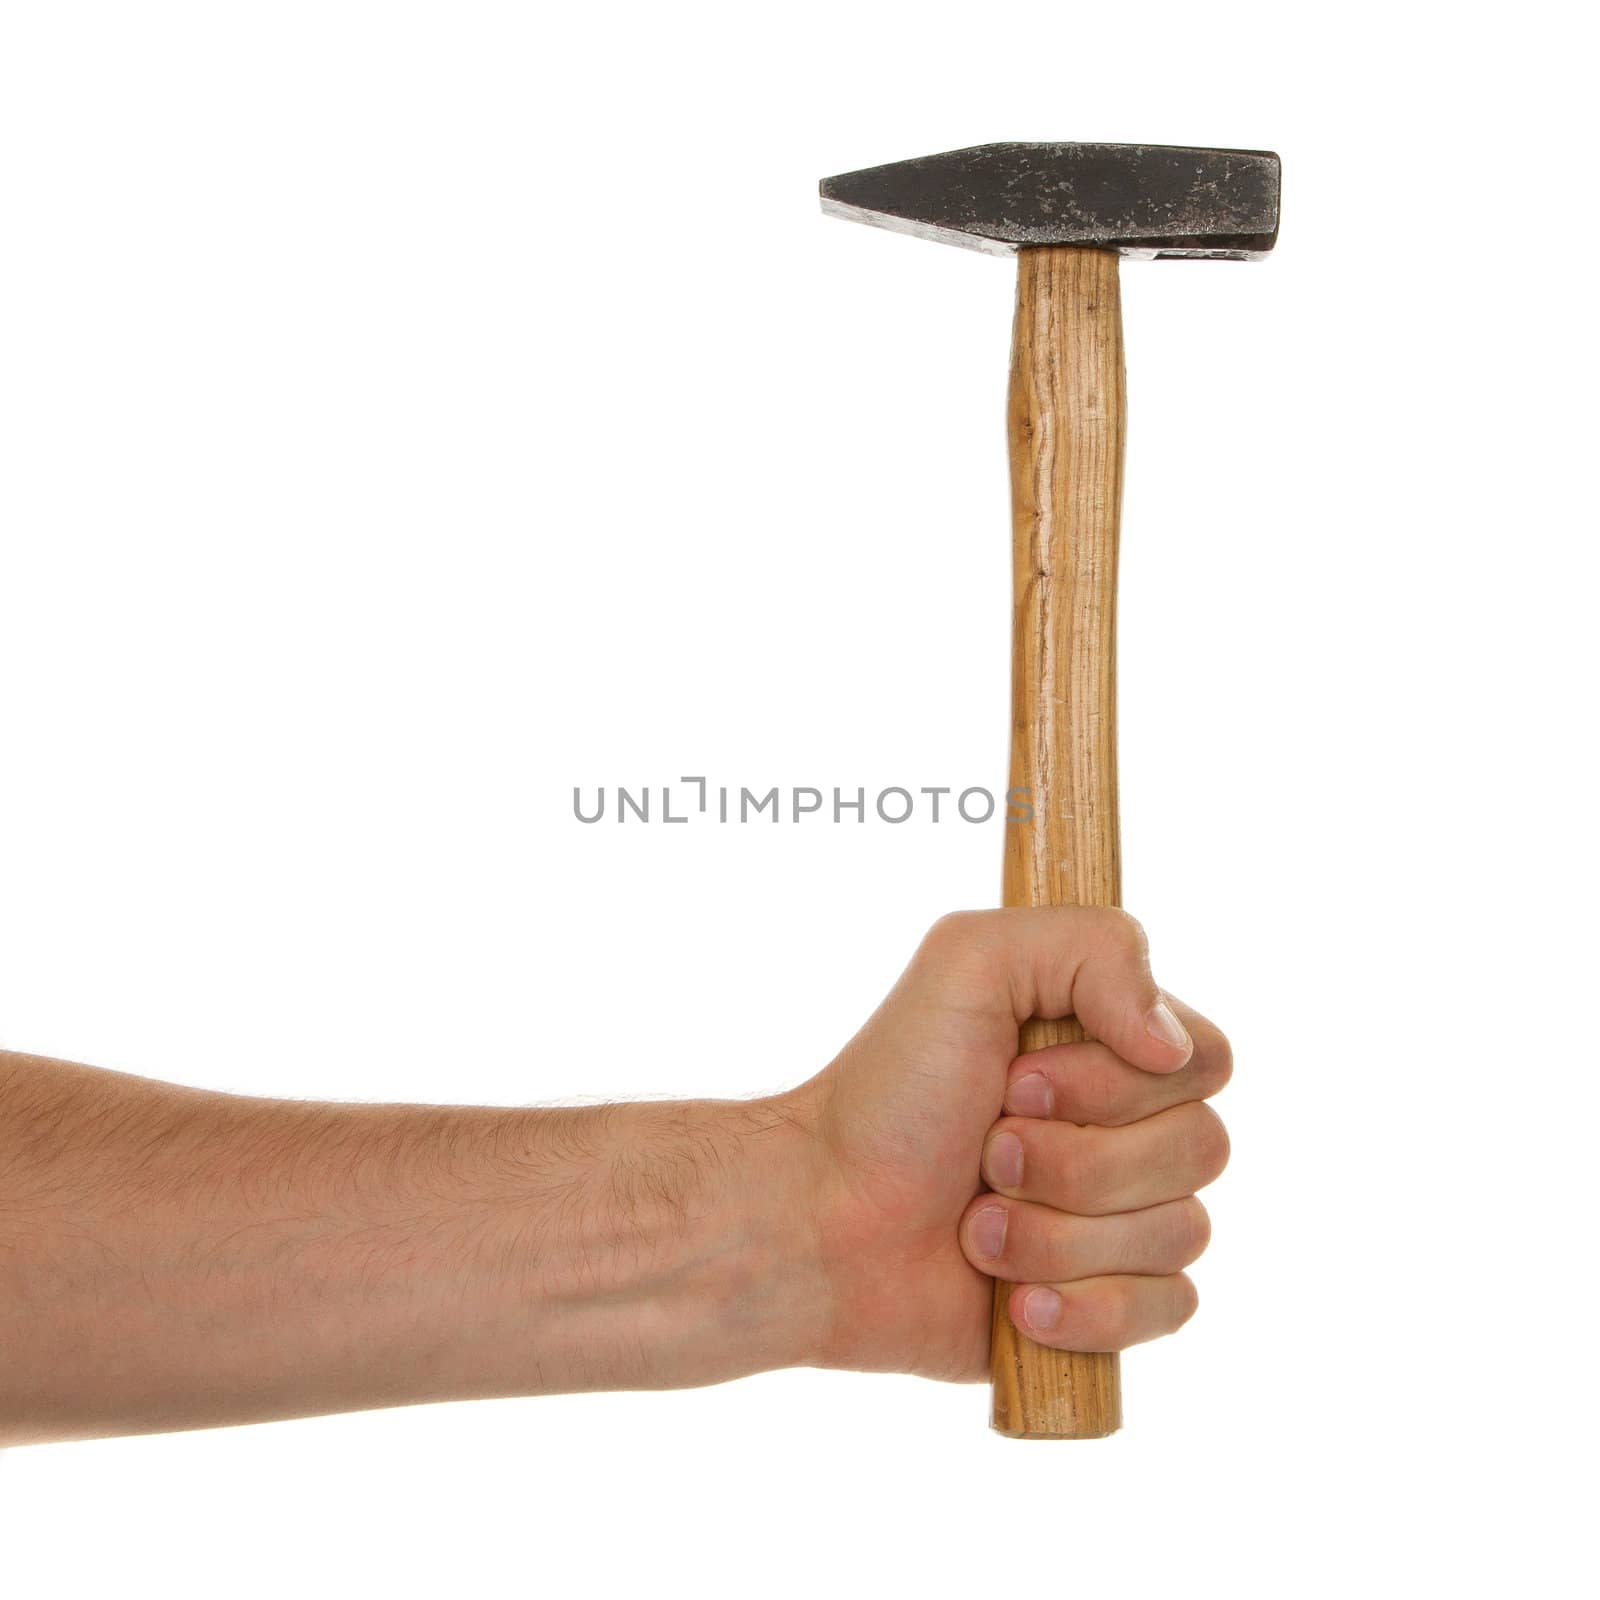 Man holding a old wooden hammer, isolated on a white background